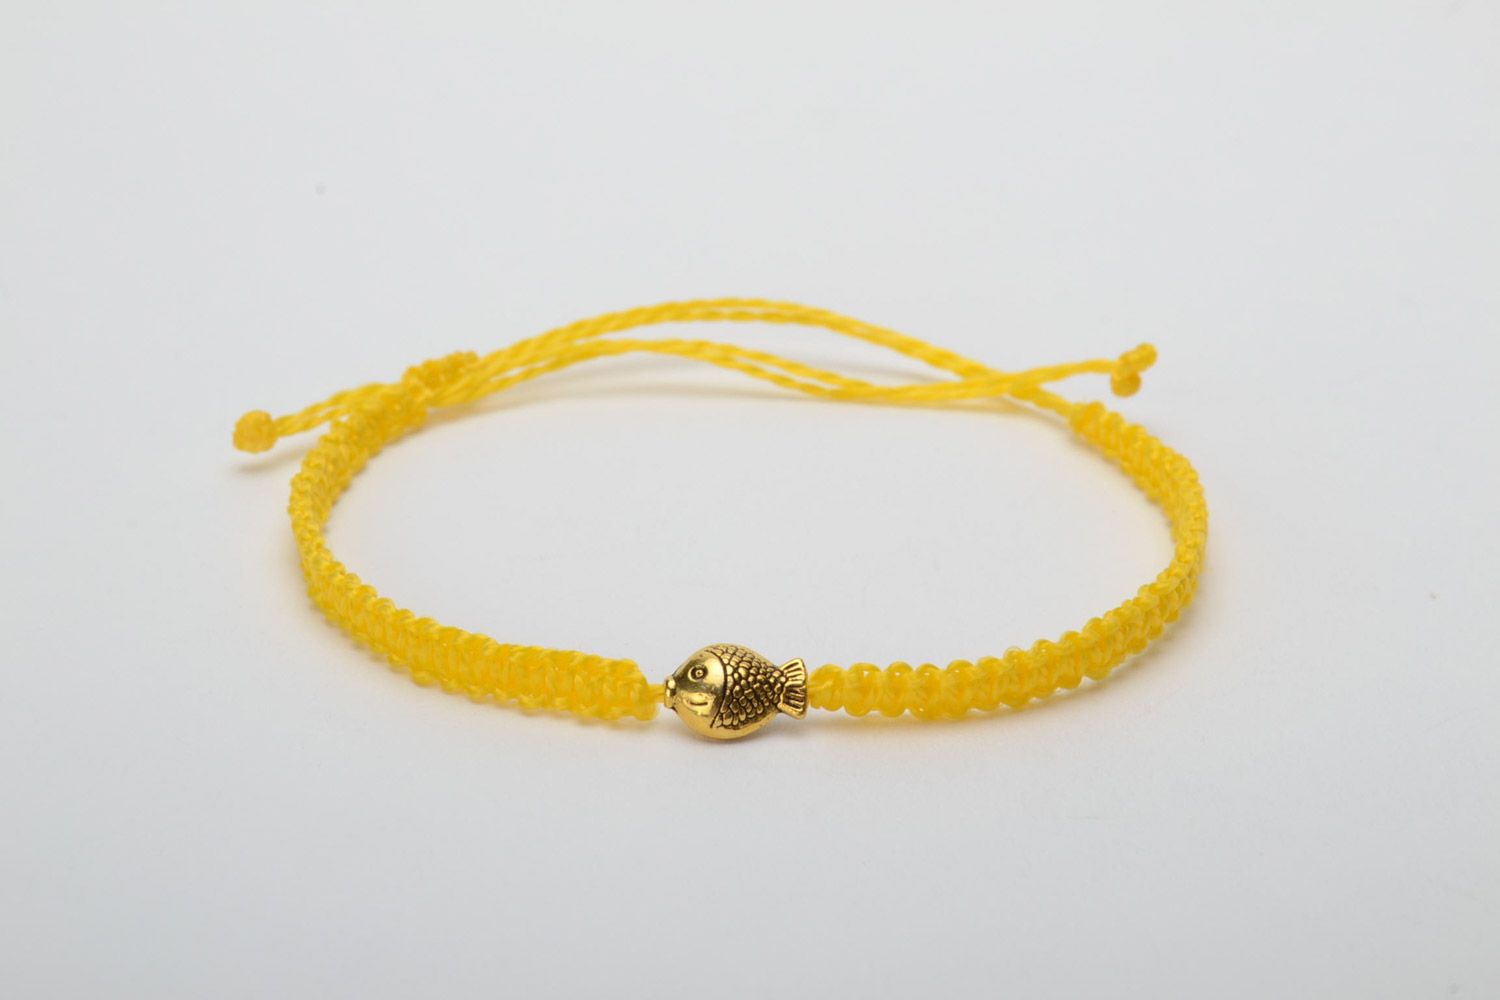 Handmade women's designer macrame woven bracelet of yellow color with metal charm in the shape of fish photo 5